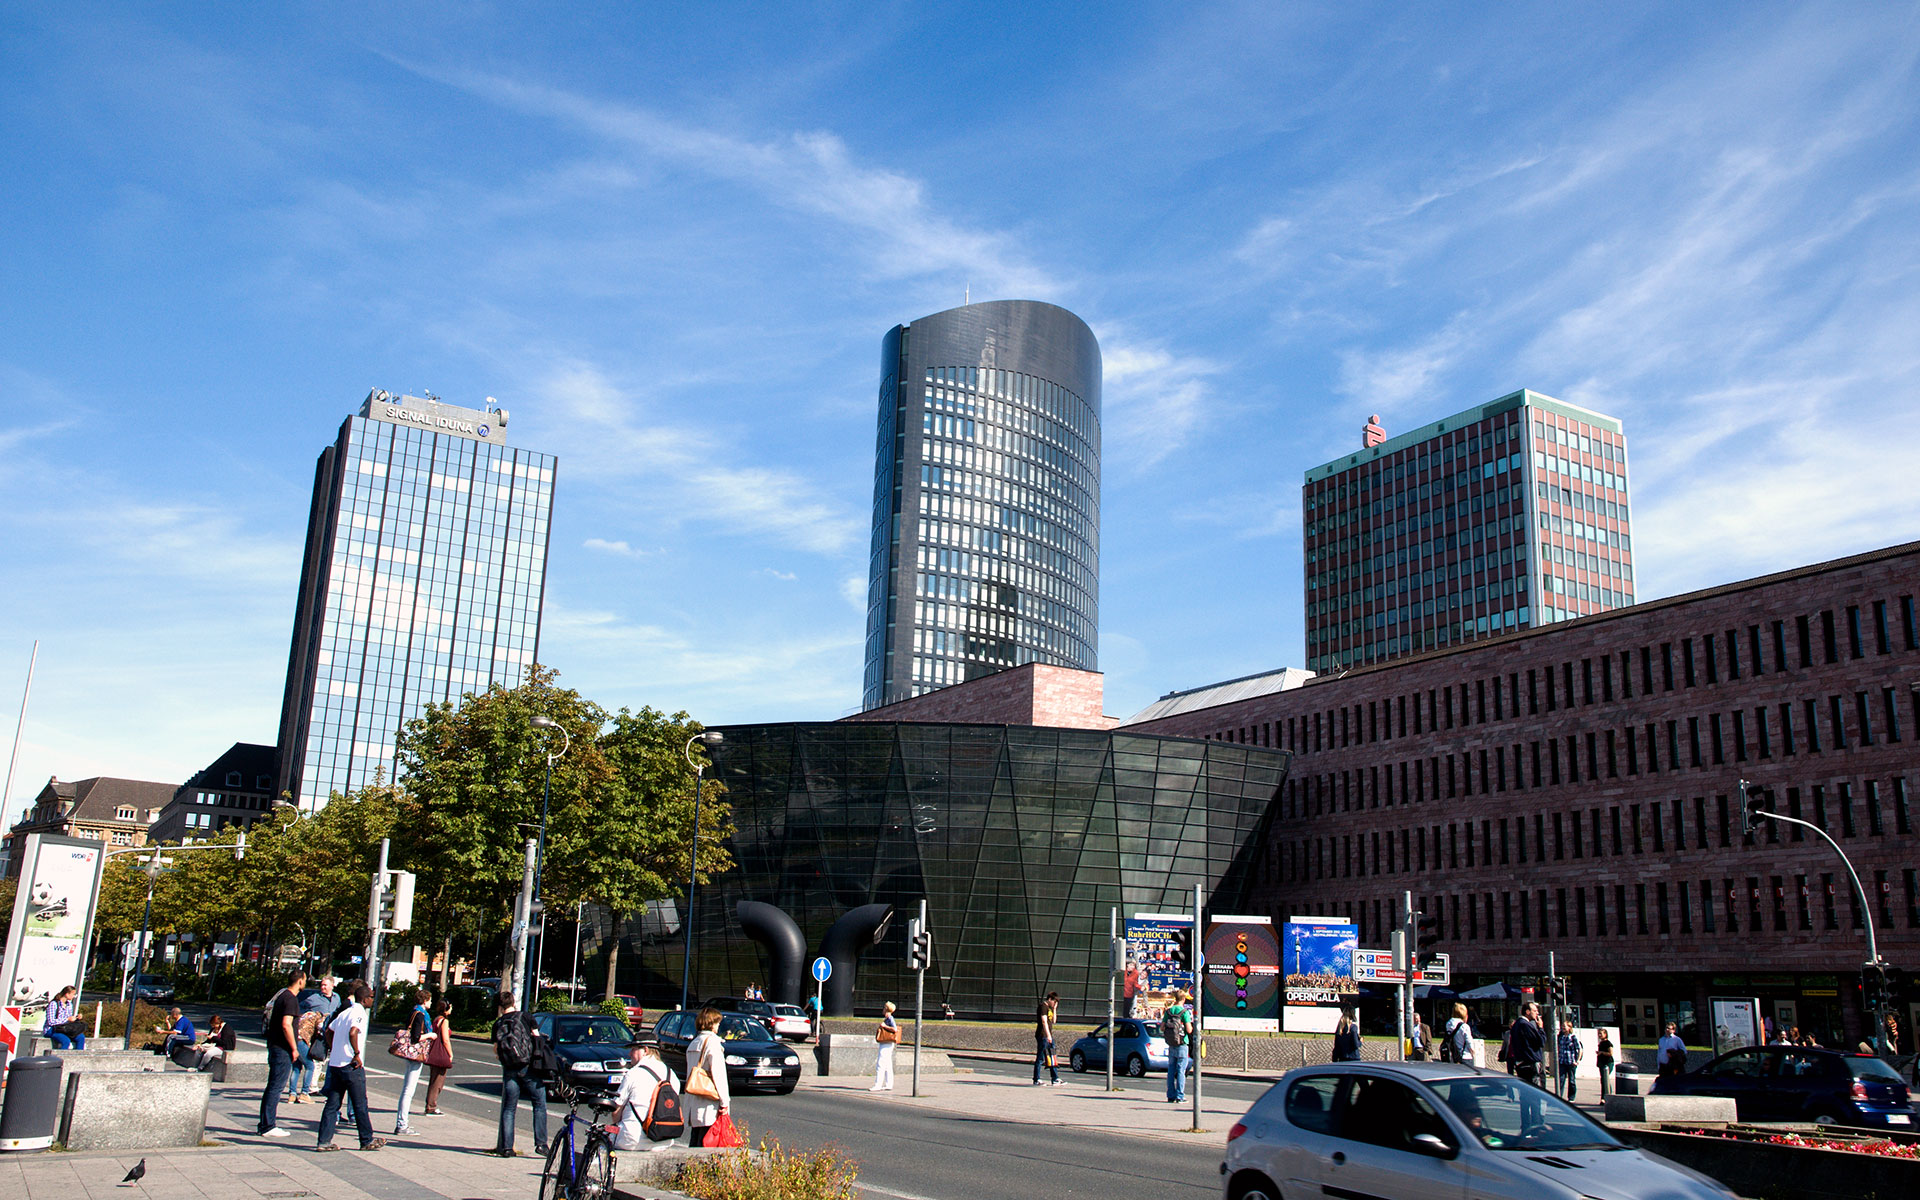 Dortmund secures a direct rail link with Brussels and Paris from December 2015 (photo © Peter Lovás / dreamstime.com)